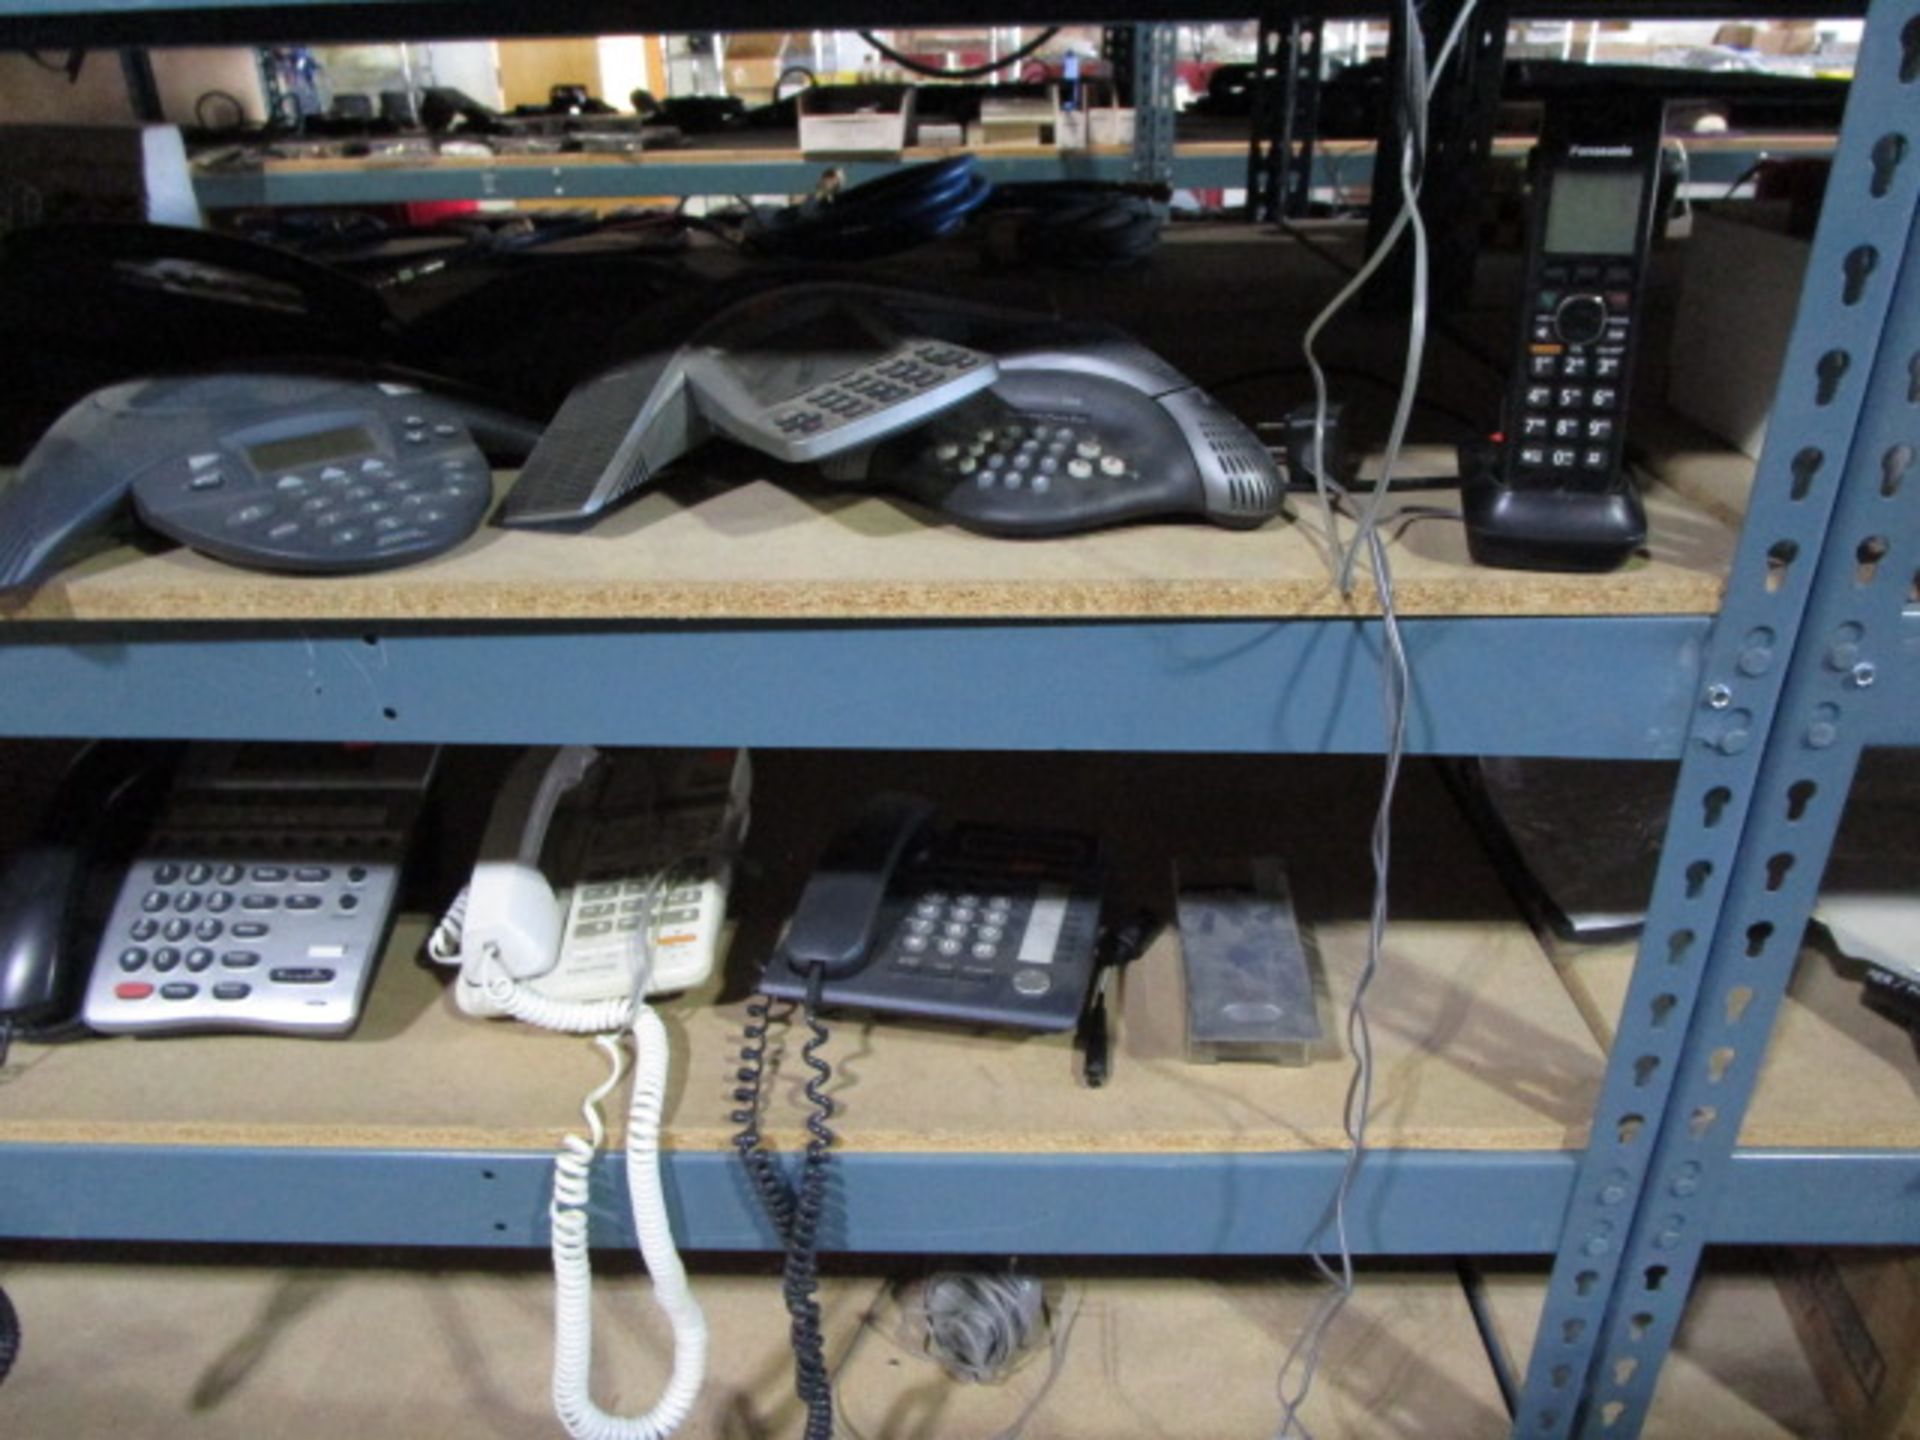 SHELVING UNIT OF ASSORTMENT OF BINDERS AND OFFICE PHONES - Image 4 of 10